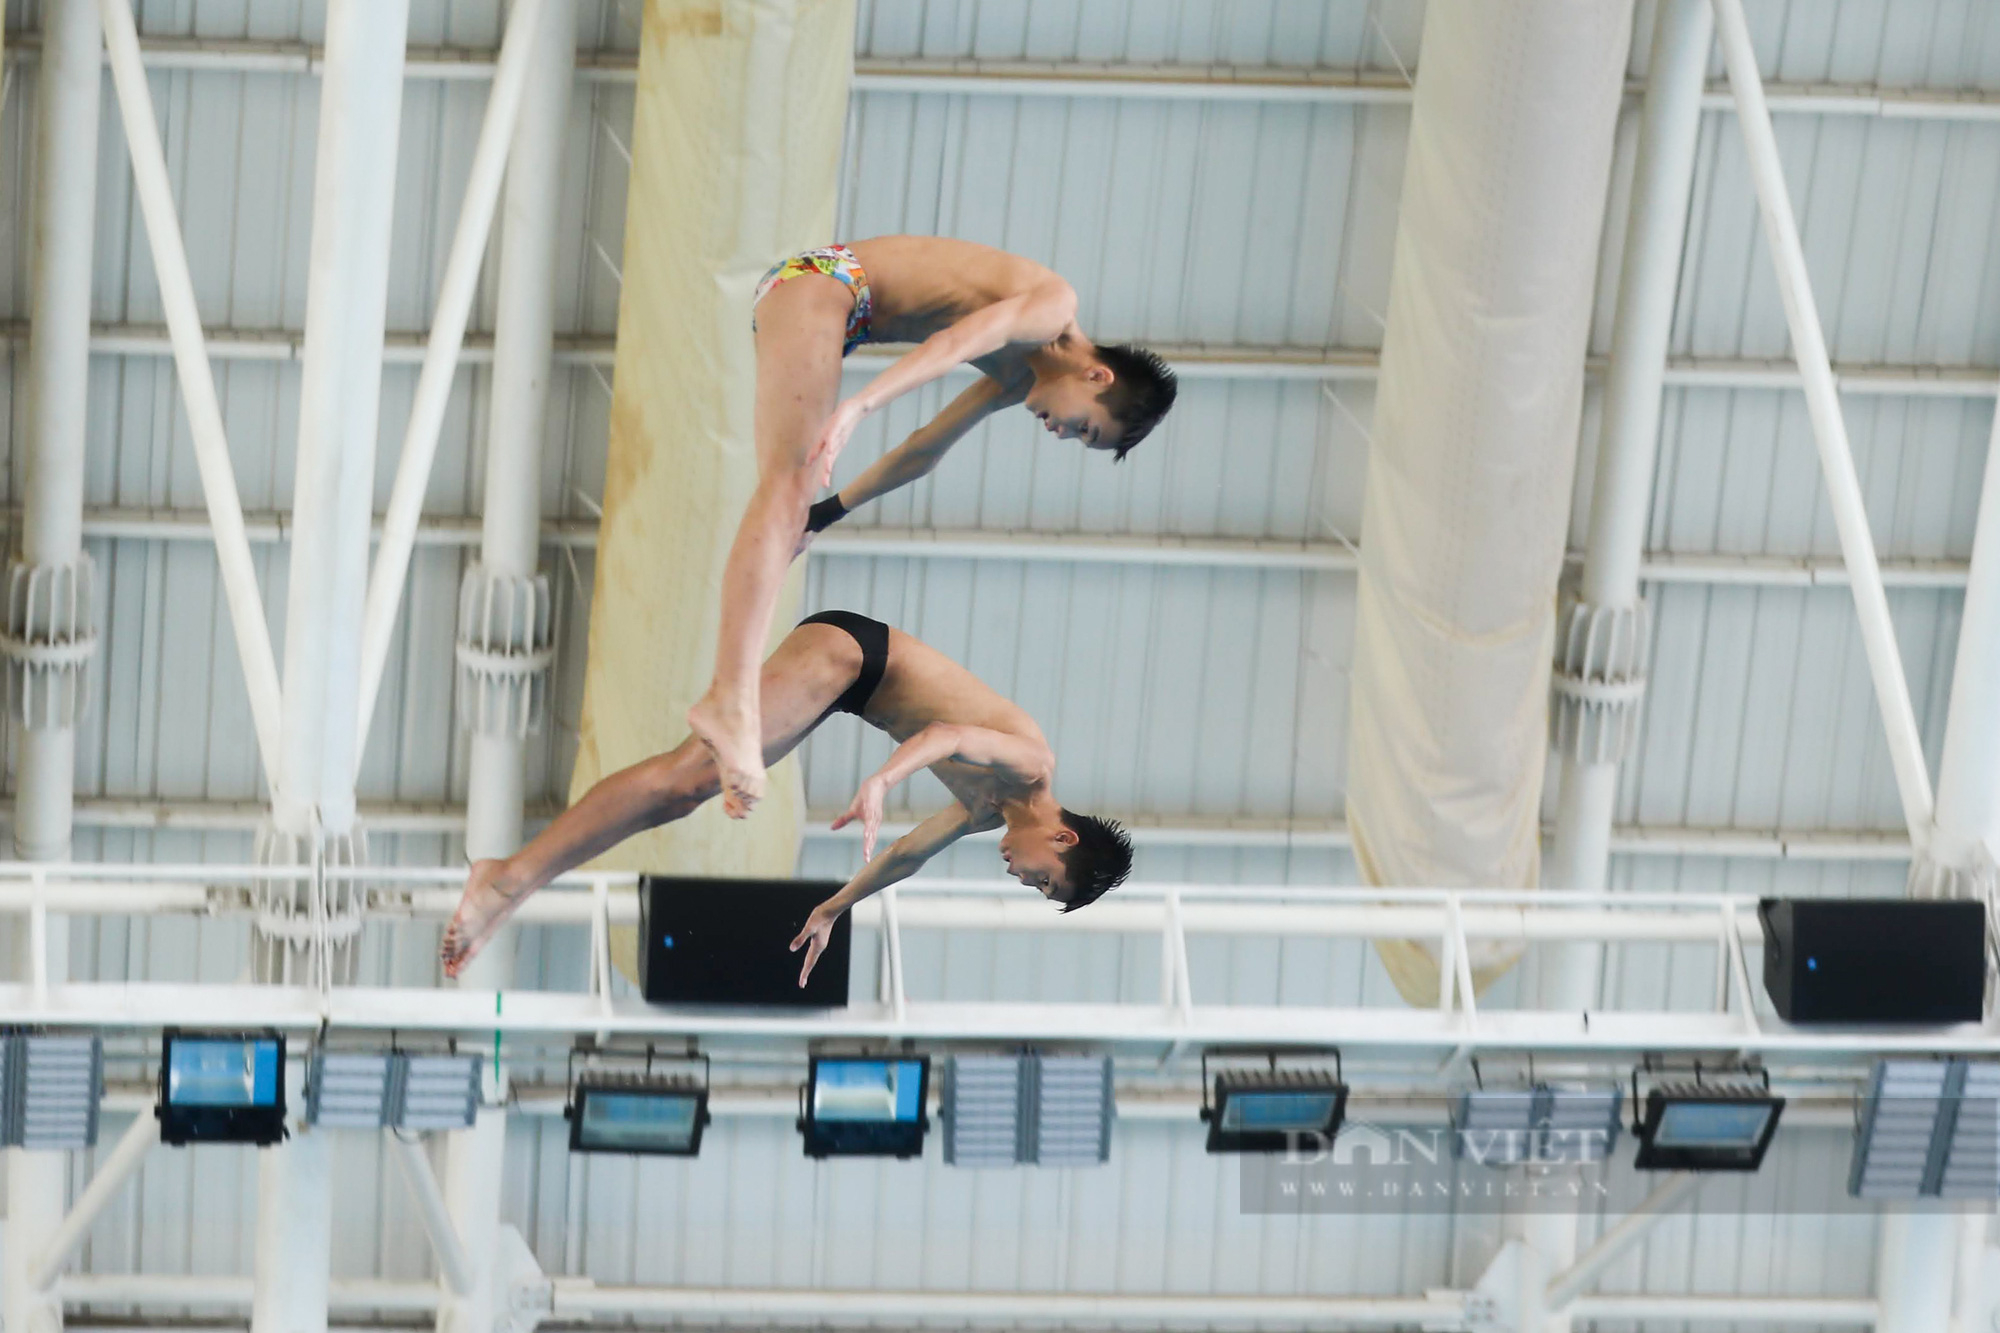 Watch with your own eyes the Vietnamese diving team practice to prepare for the 31st SEA Games - Photo 9.